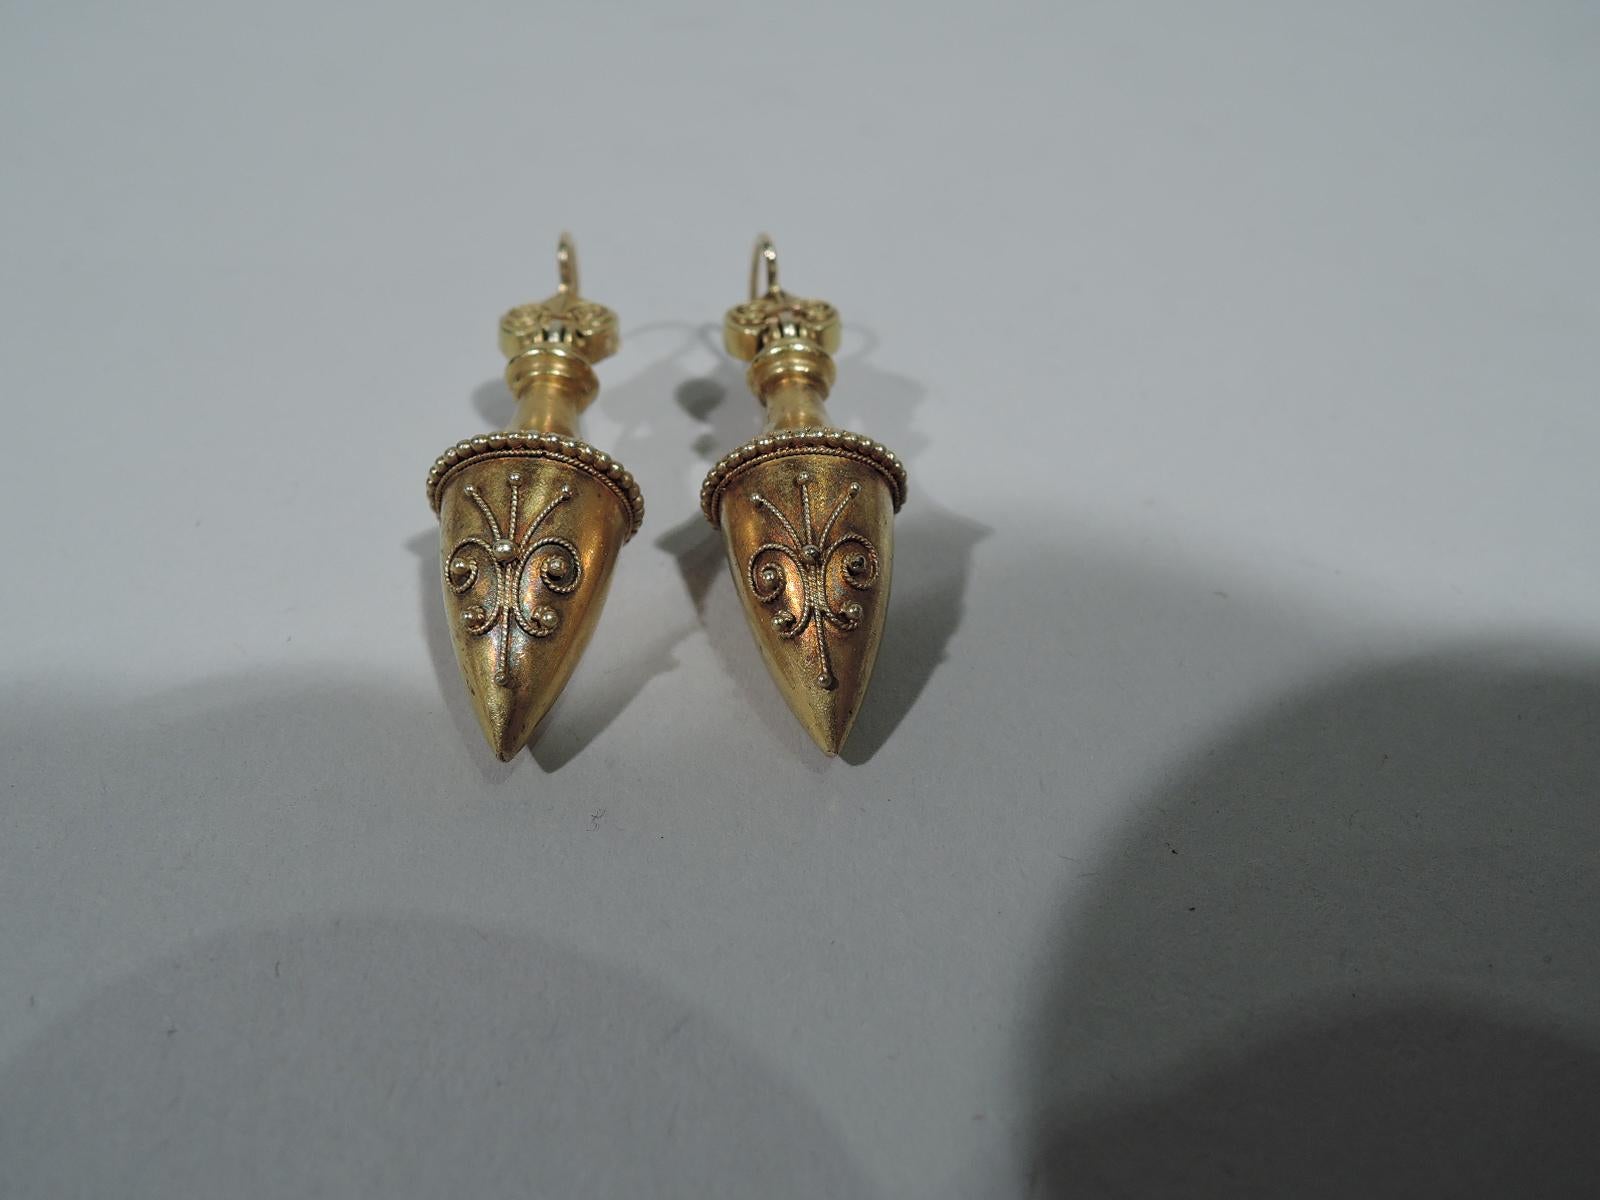 Charming pair of Etruscan Revival 15k gold earrings. Each: Conical urn with domed top. Beading. Filigree volute scrolls on urn and bail. England, ca 1880. 

Height (to bail): 1 3/8 in. 